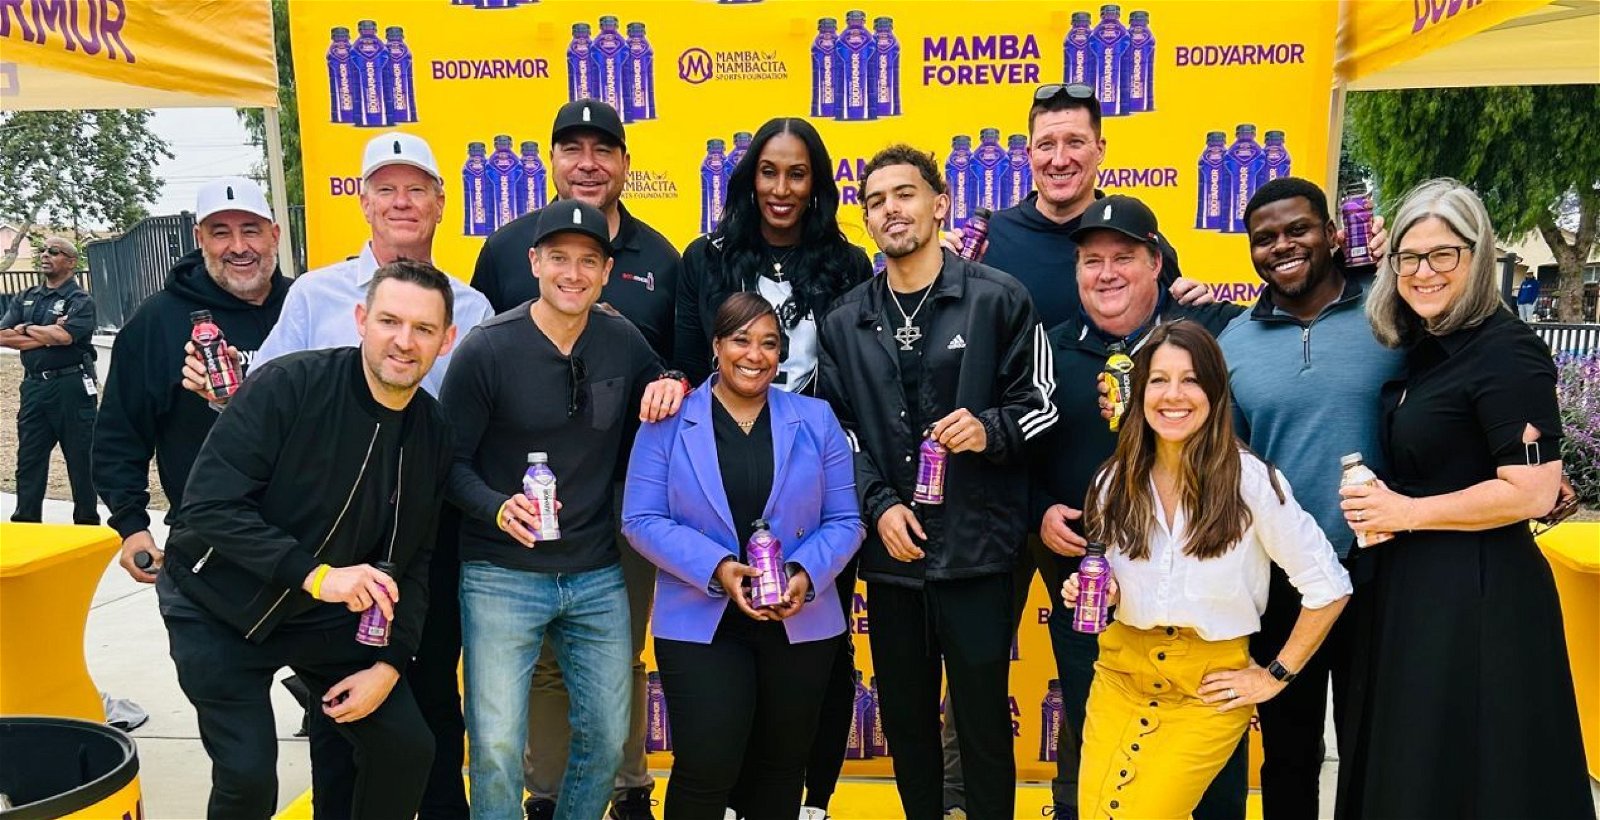 Group of people at a Mamba Foundation event, with Mamba bottles in hands